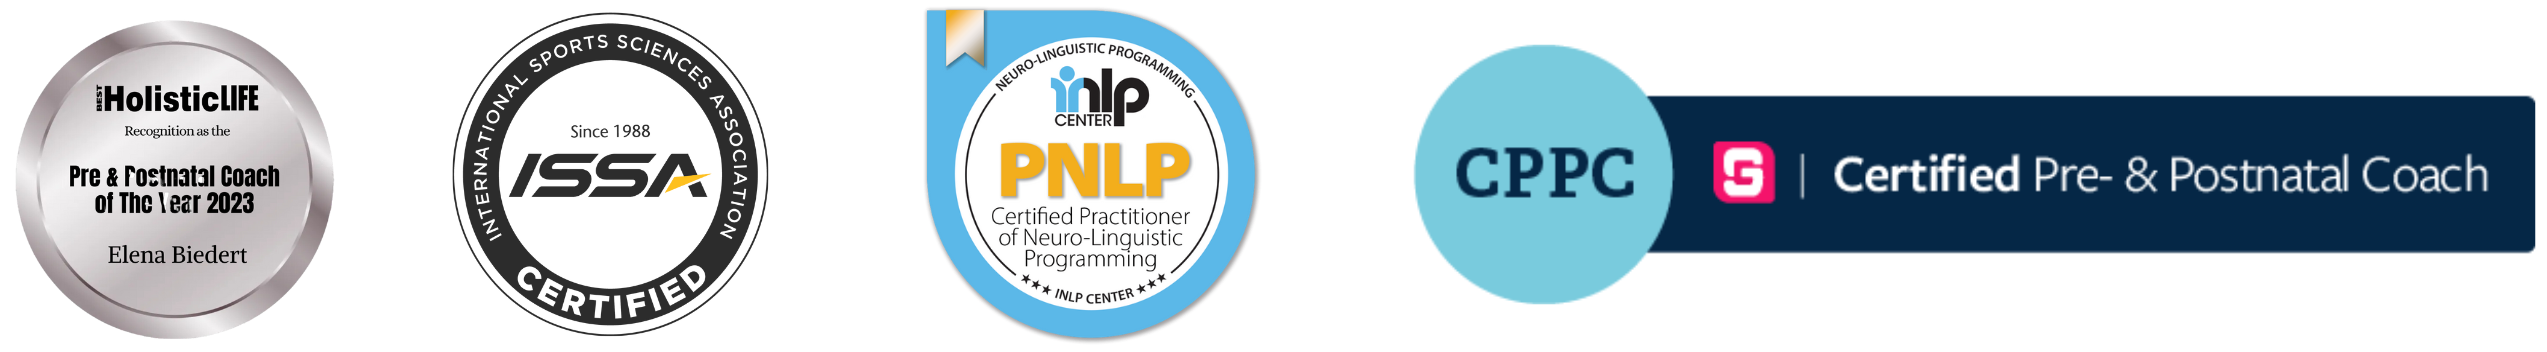 Badges and awards of Elena Biedert: Best Pre- and Postnatal Coach of the Year 2023 by Best Holistic Life Magazine, ISSA Certified, Certified Practitioner of NEuro-Linguistic Programming by iNLP Center, Certified Pre- & Postnatal Coach by Girls Gone Strong